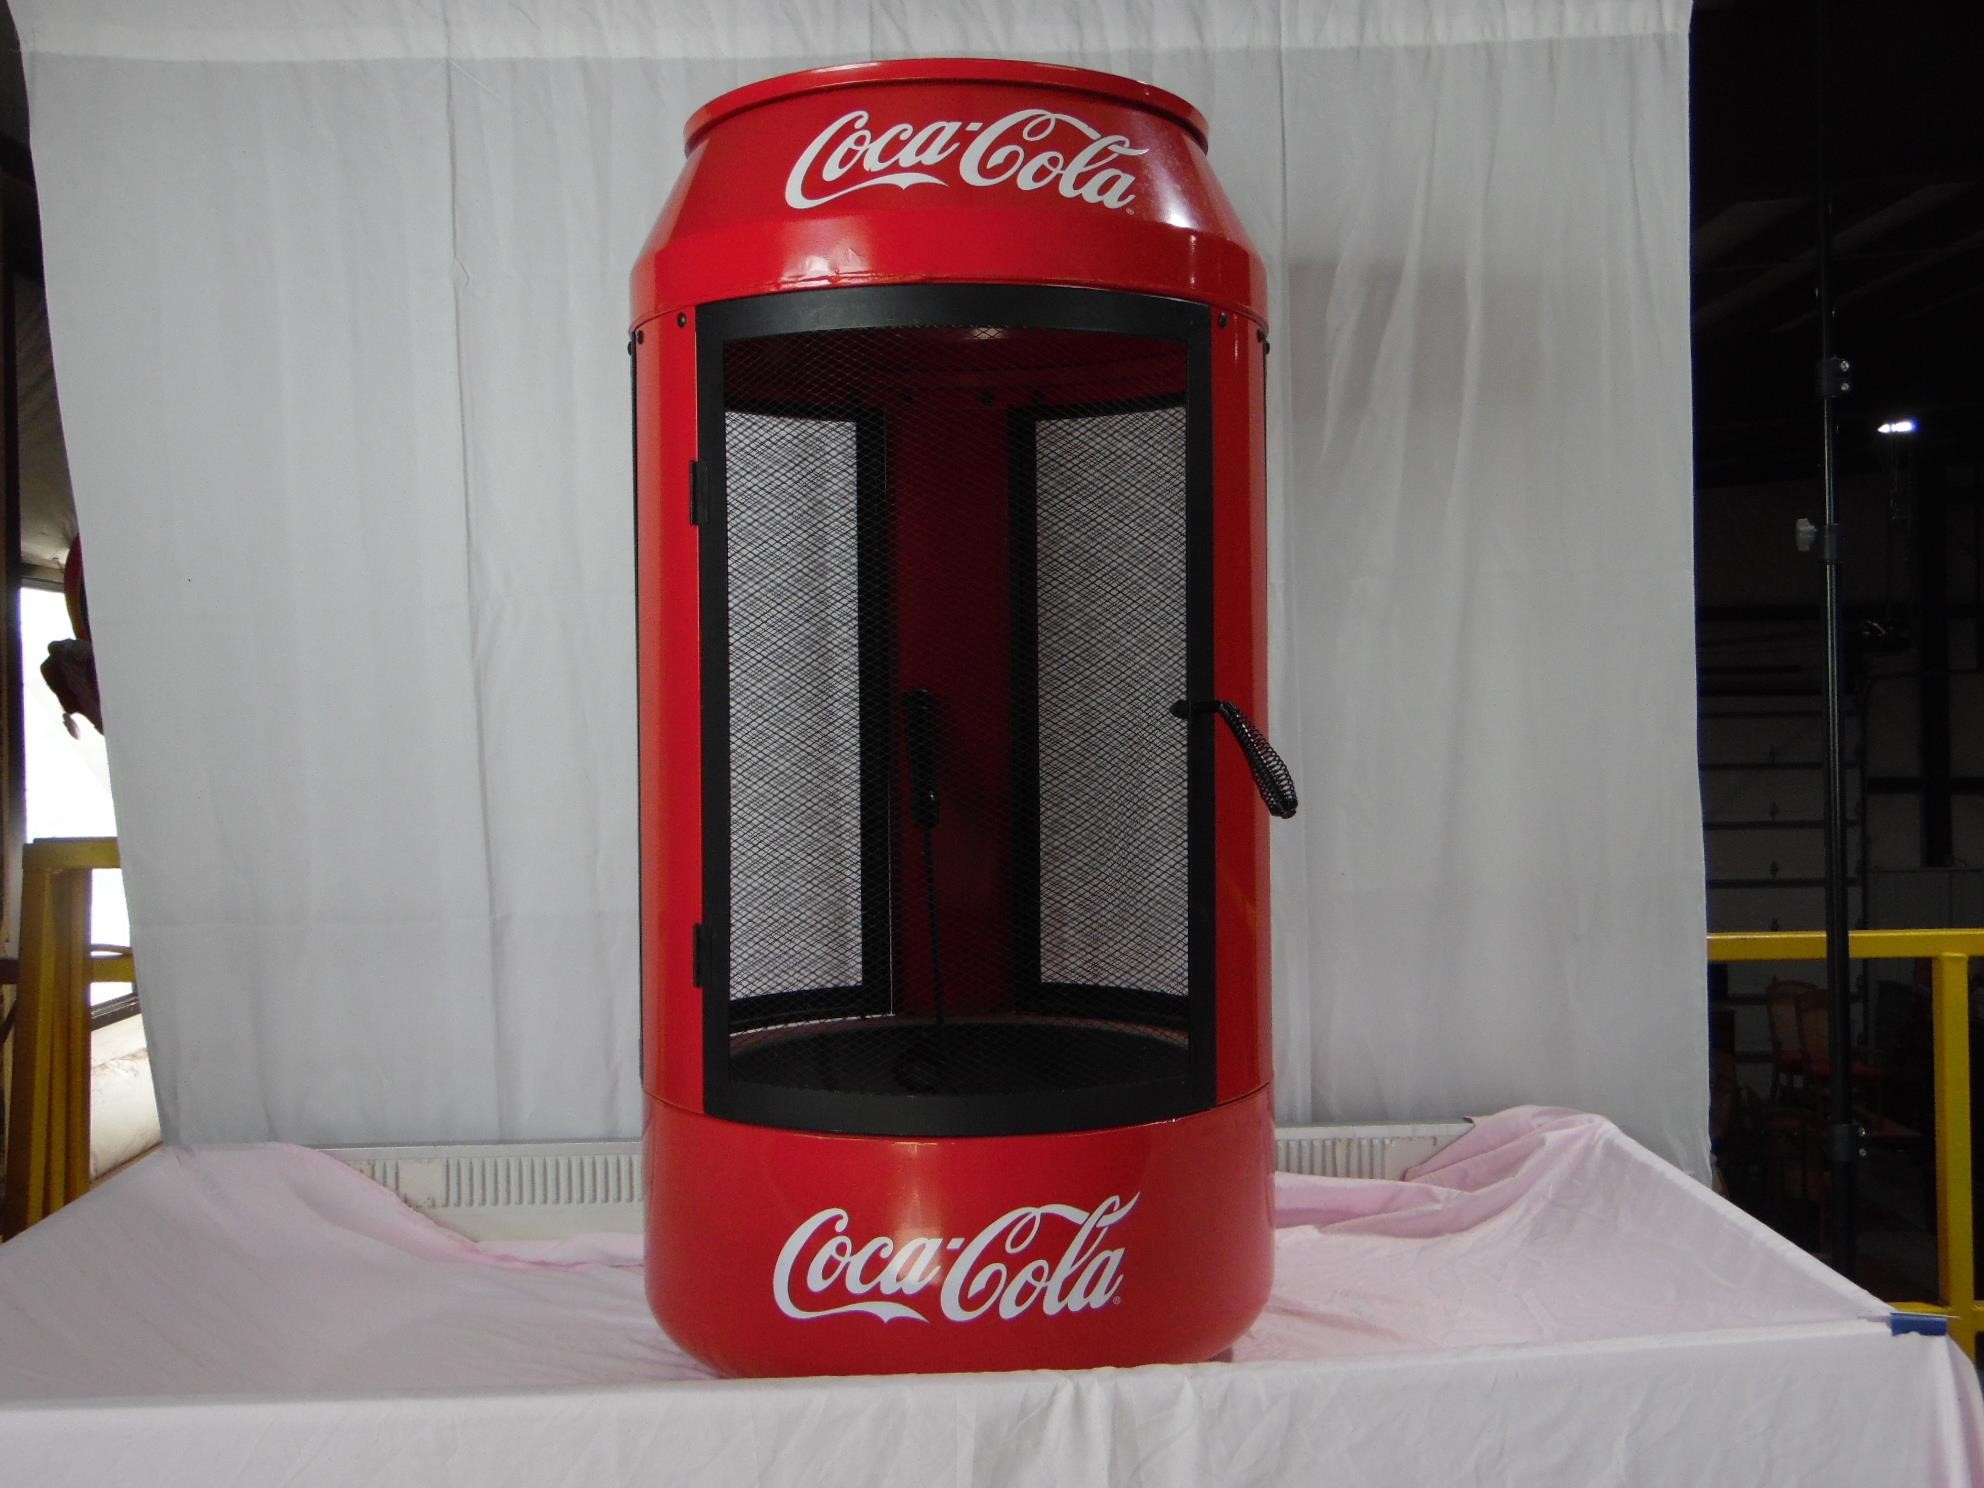 Advertising Auction of Coke, Alcohol, Tobacco, & Candy/Food